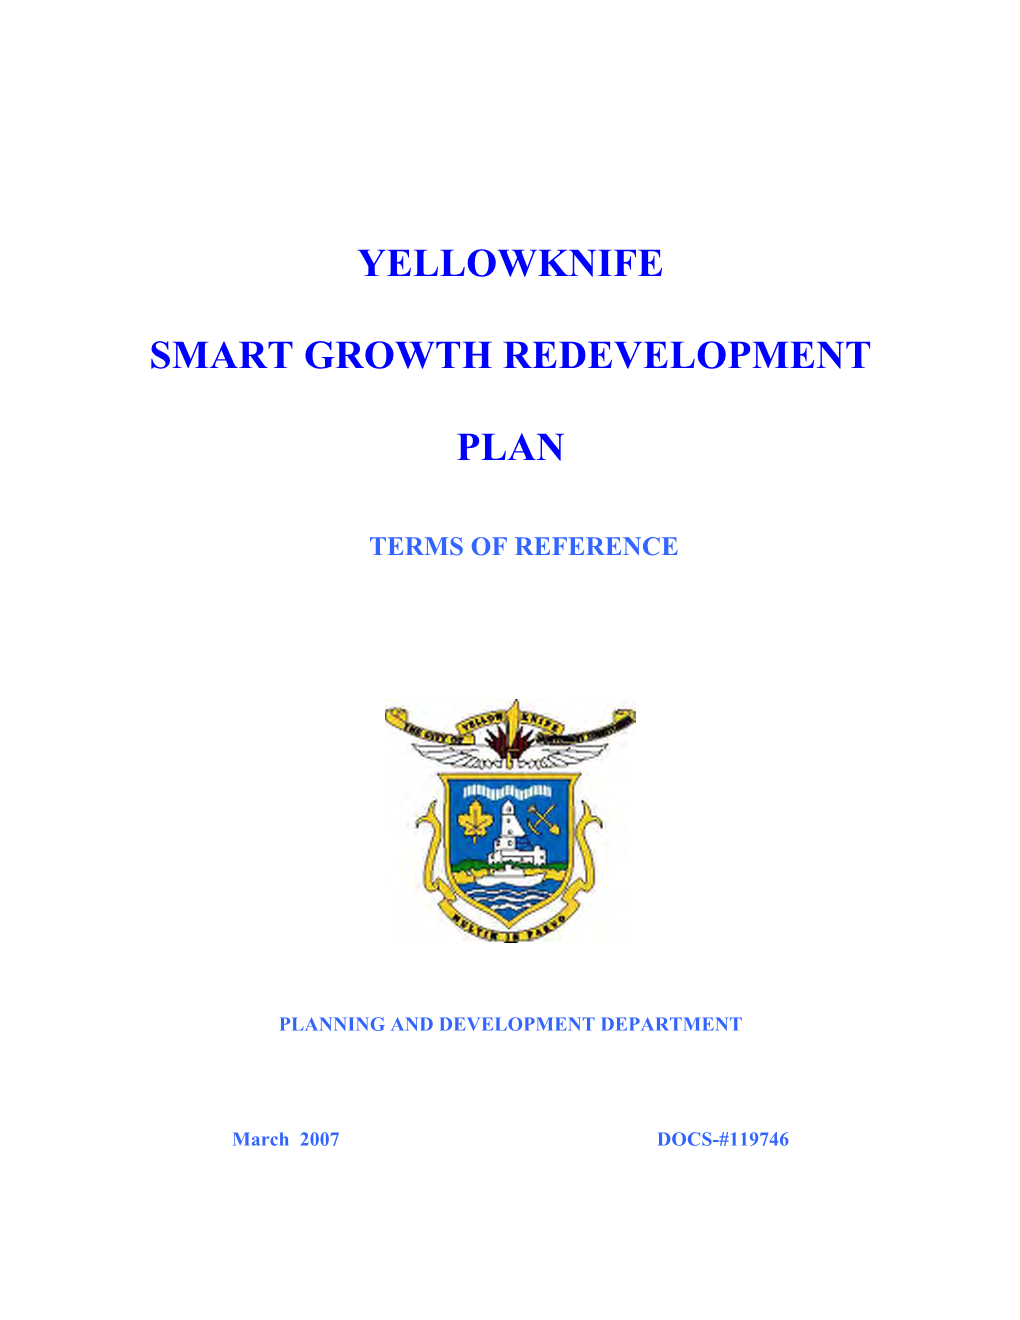 Yellowknife Smart Growth Redevelopment Plan Proposes a Strategy for the City’S Core Area, Waterfront, Primary Commercial Districts, and Entranceways to the City